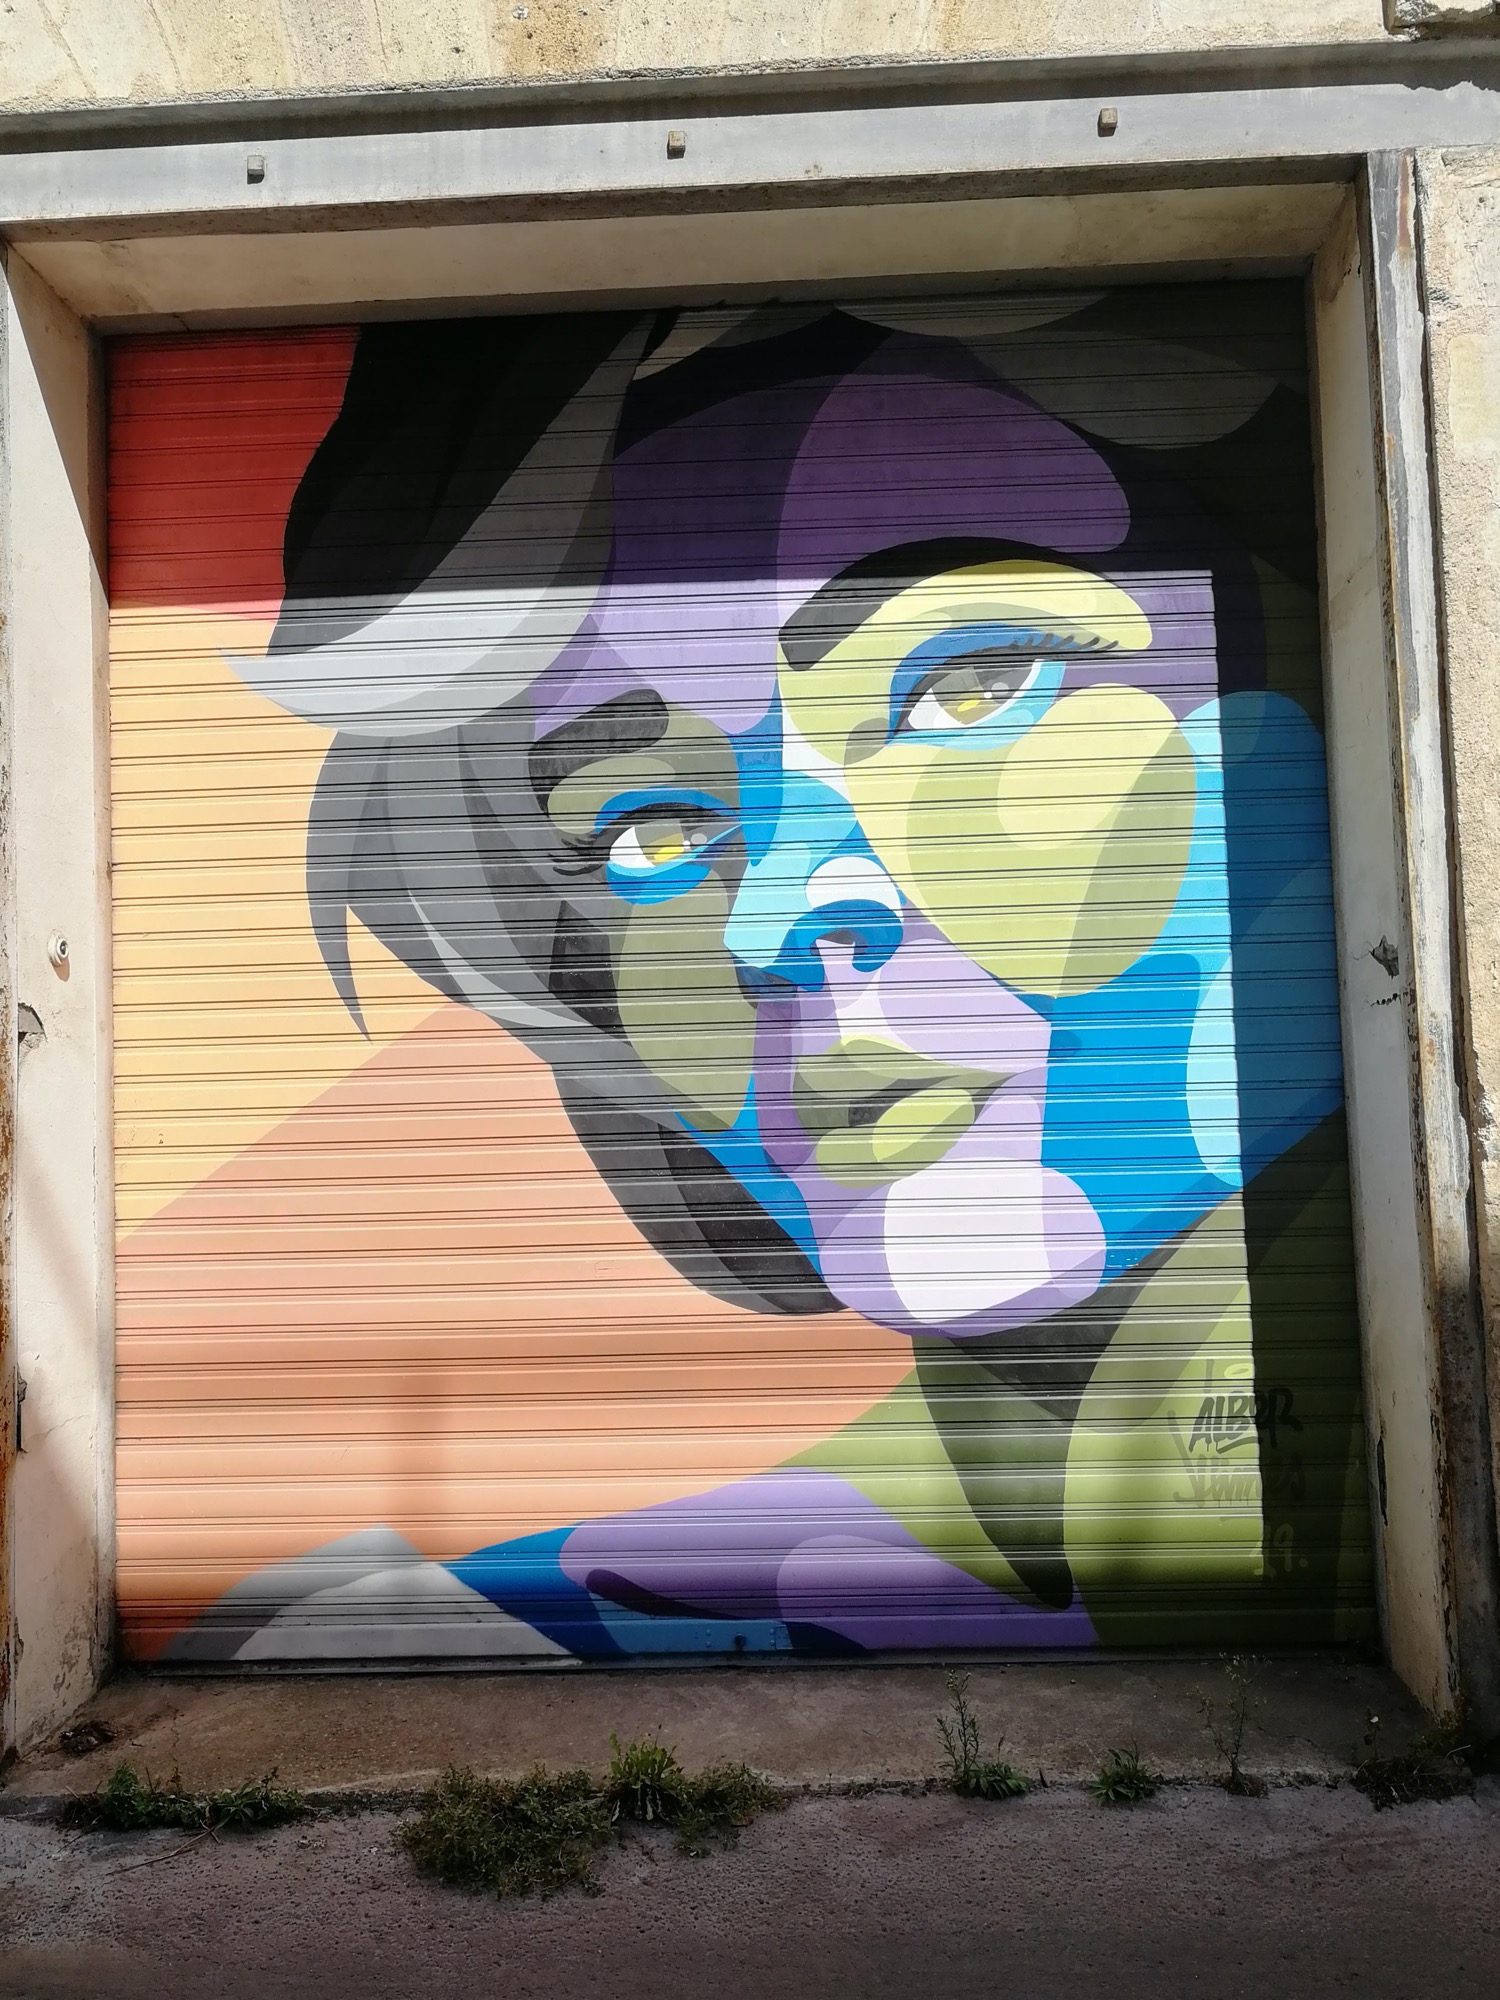 Graffiti 4331  by the artist Alber captured by Rabot in Bordeaux France